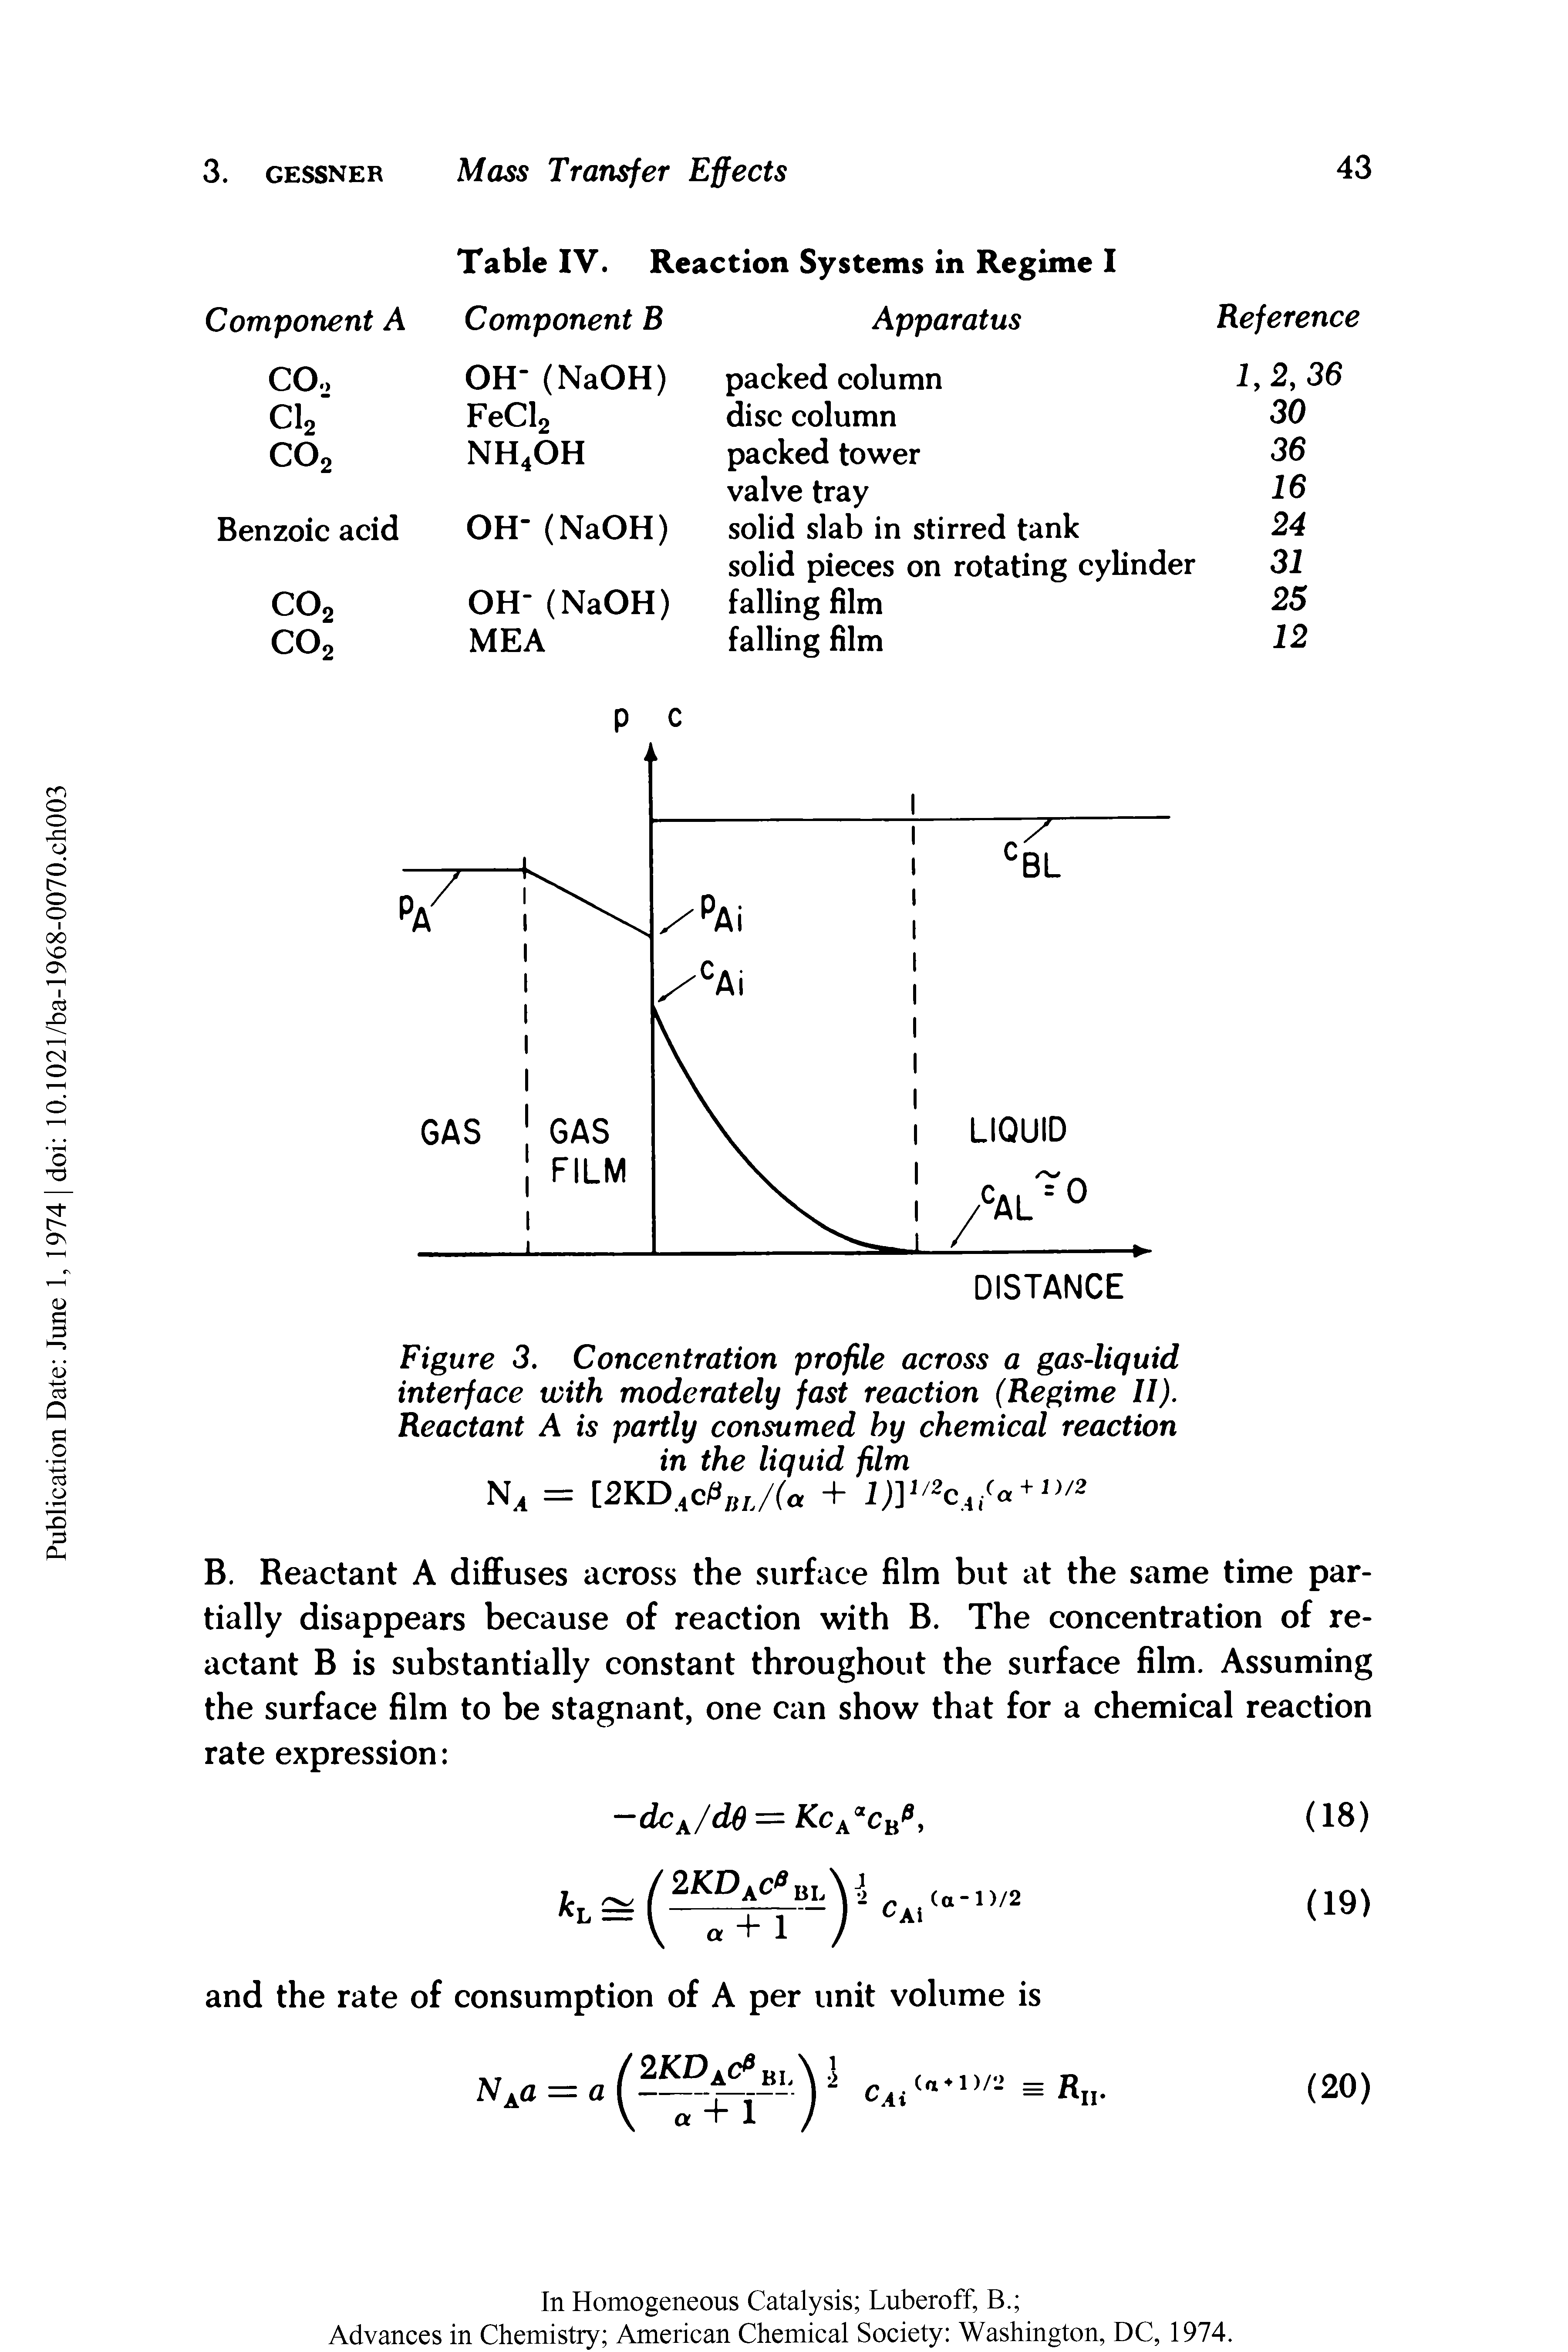 Figure 3. Concentration profile across a gas-liquid interface with moderately fast reaction (Regime II).